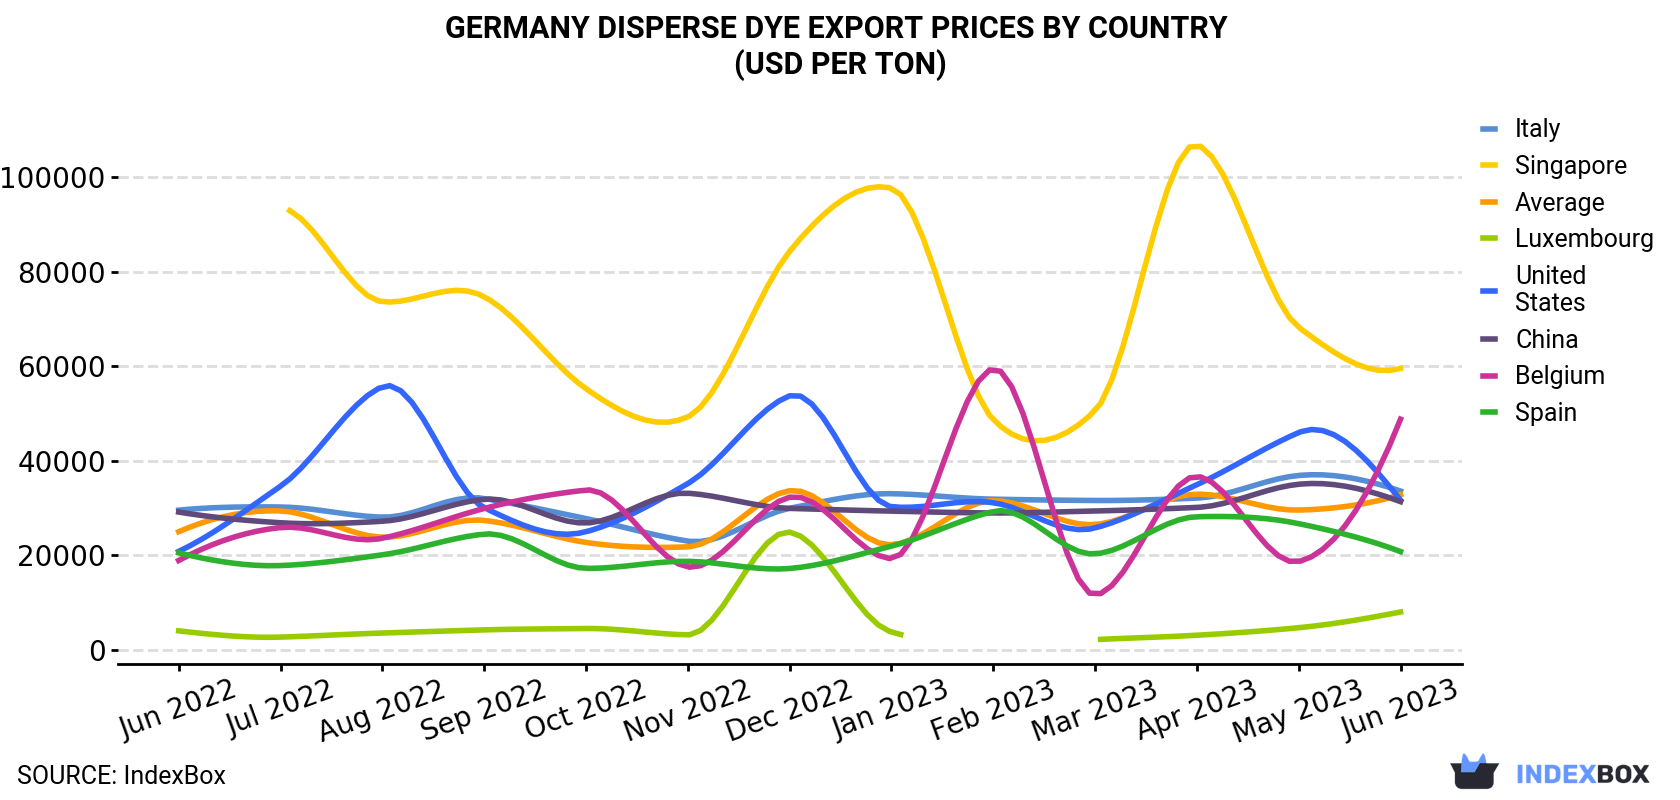 Germany Disperse Dye Export Prices By Country (USD Per Ton)